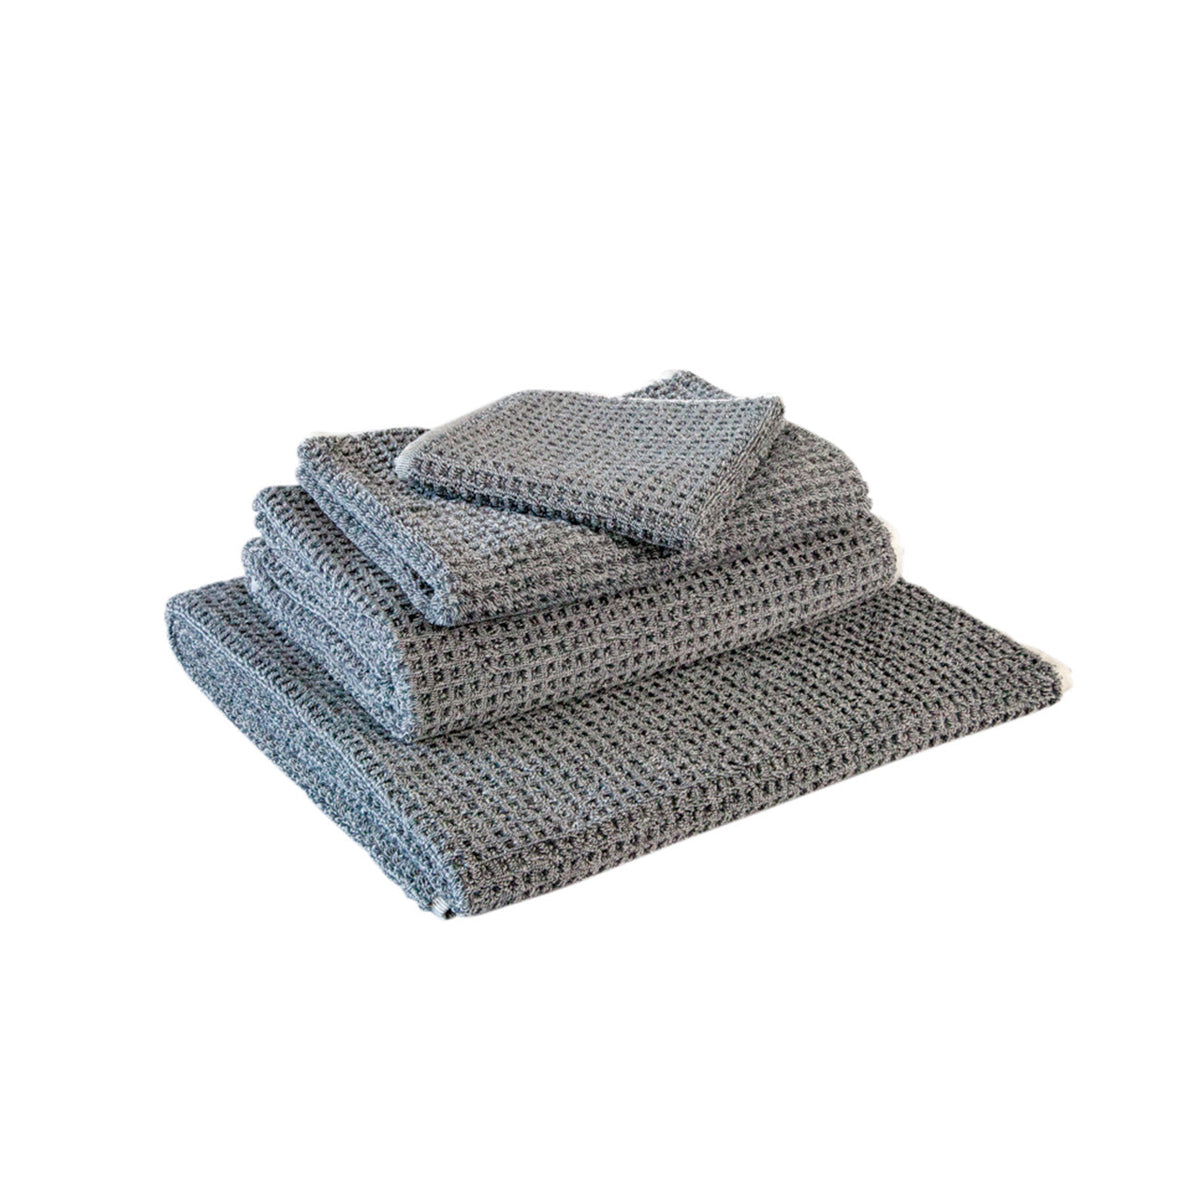 Waffle Gray Tweed 4 or 3 Pc. Set by Turkish Towel Collection